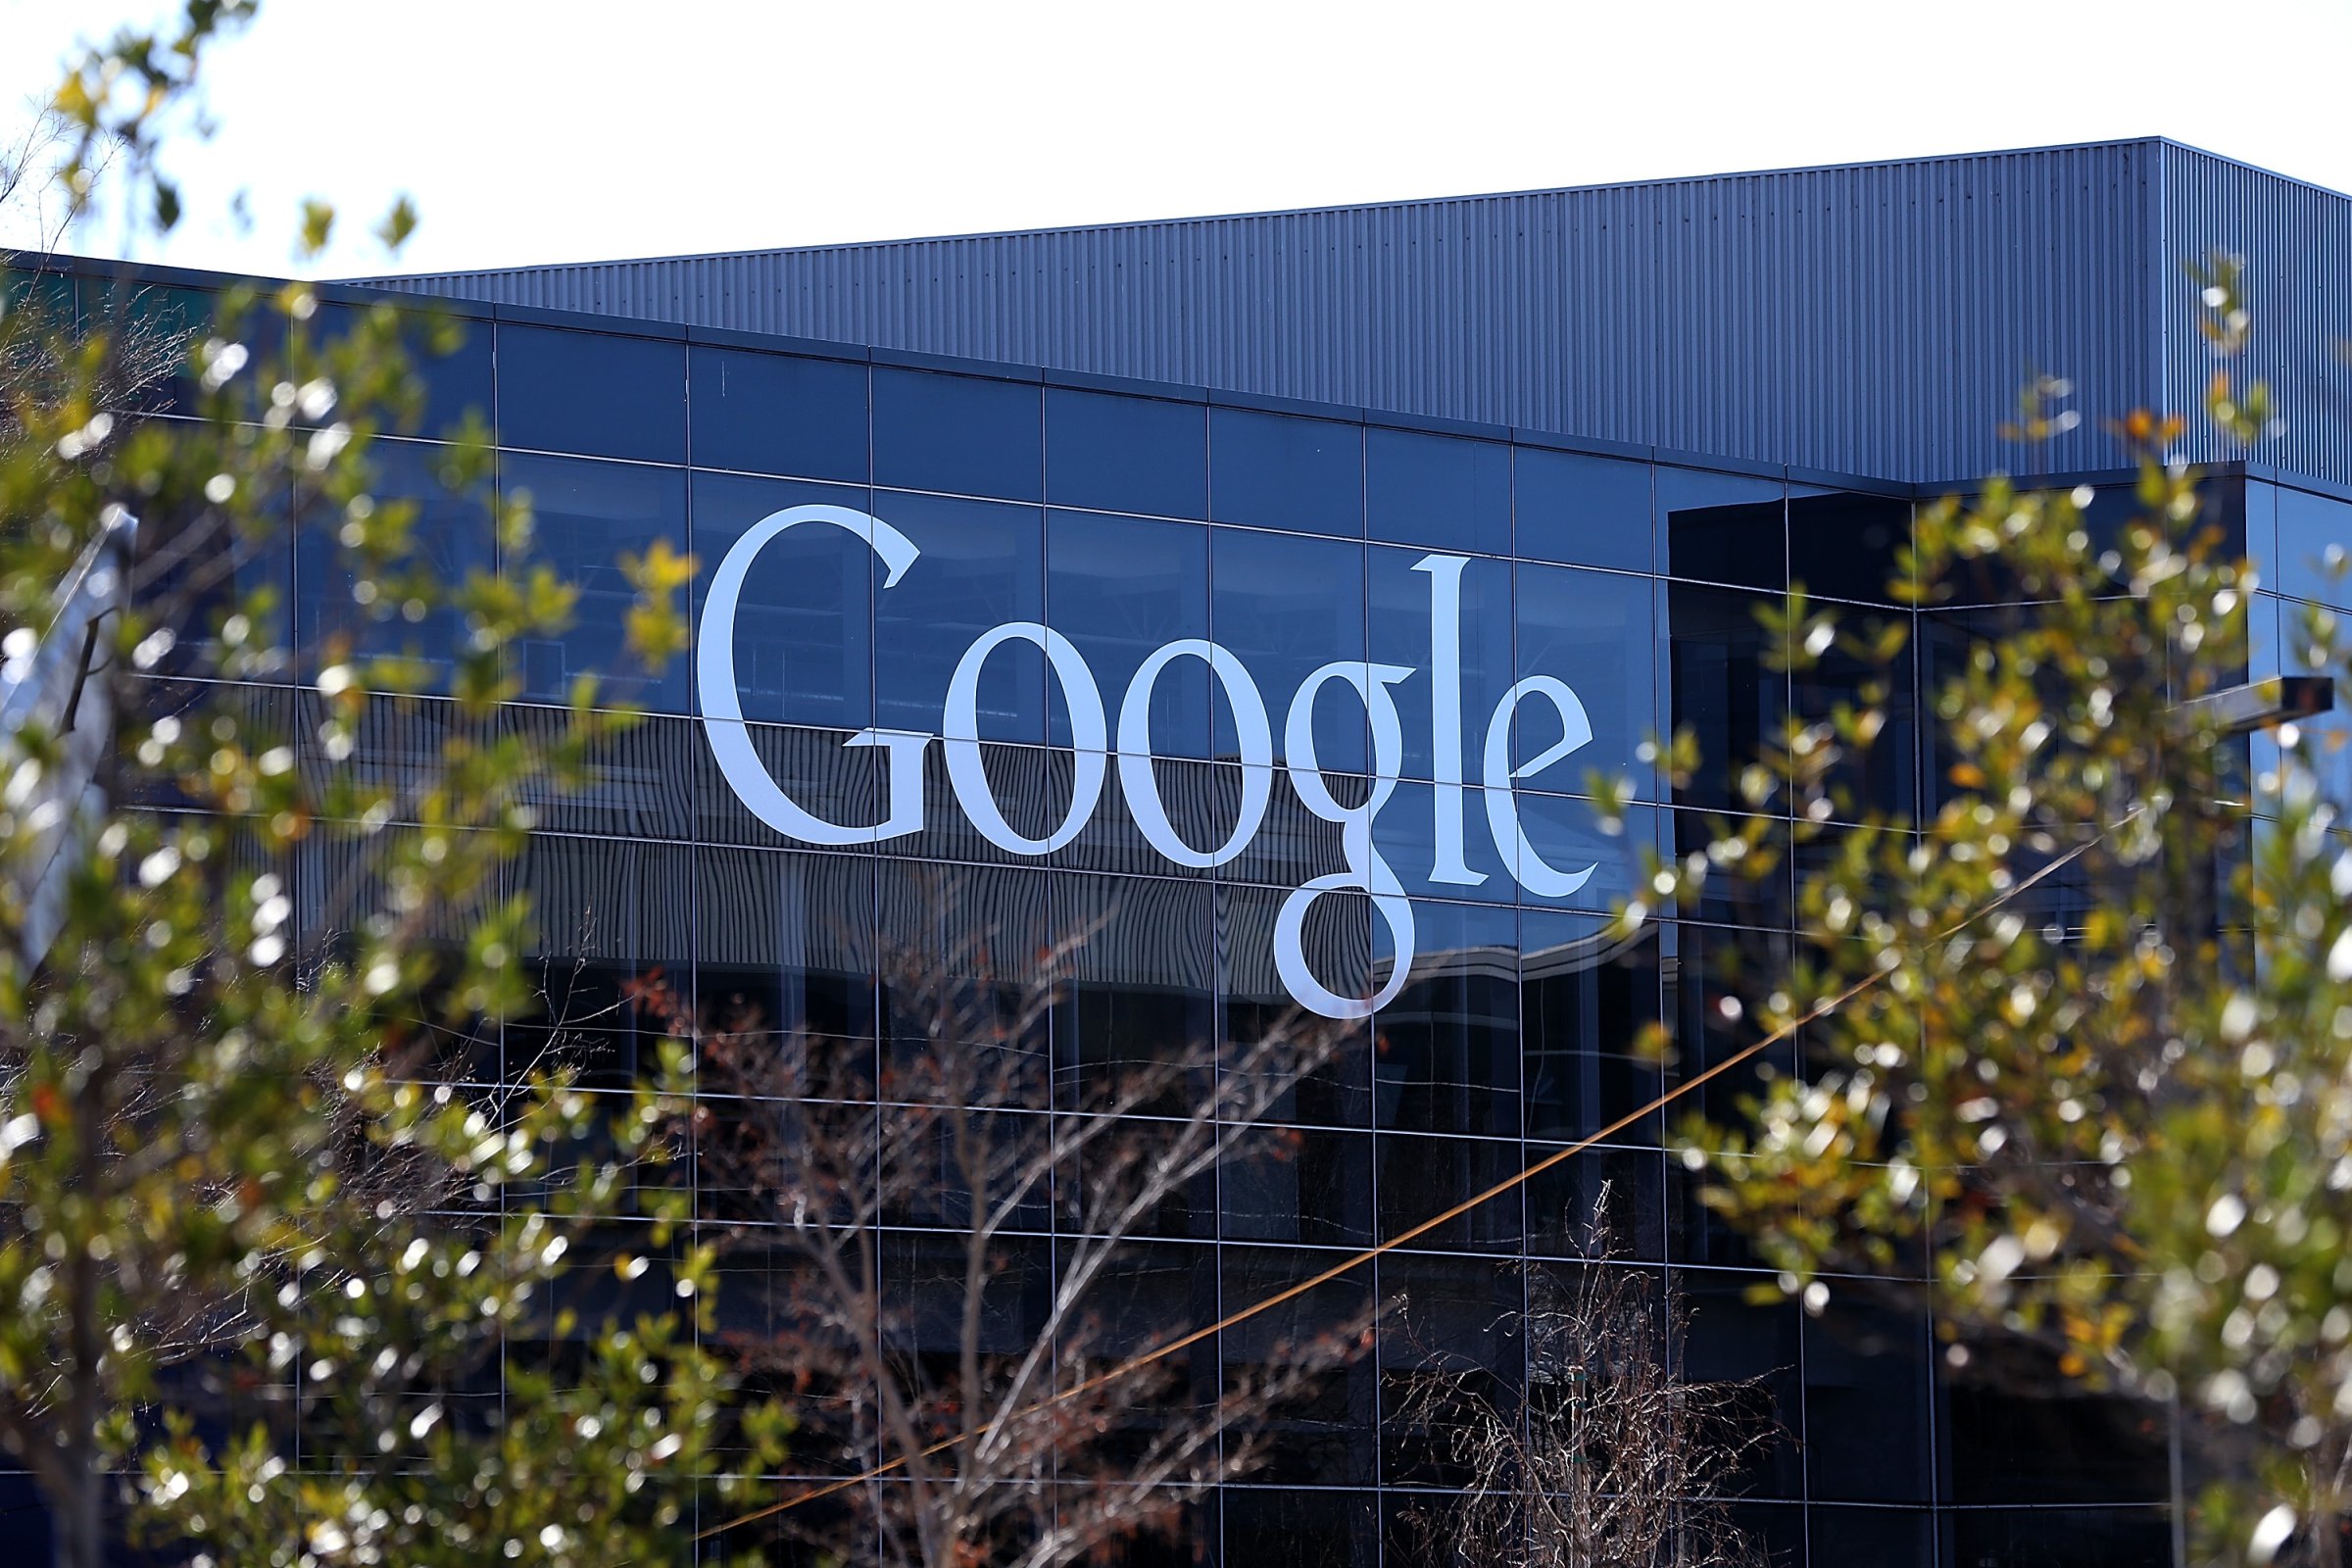 Google headquarters in Mountain View, Calif. on Jan. 30, 2014.